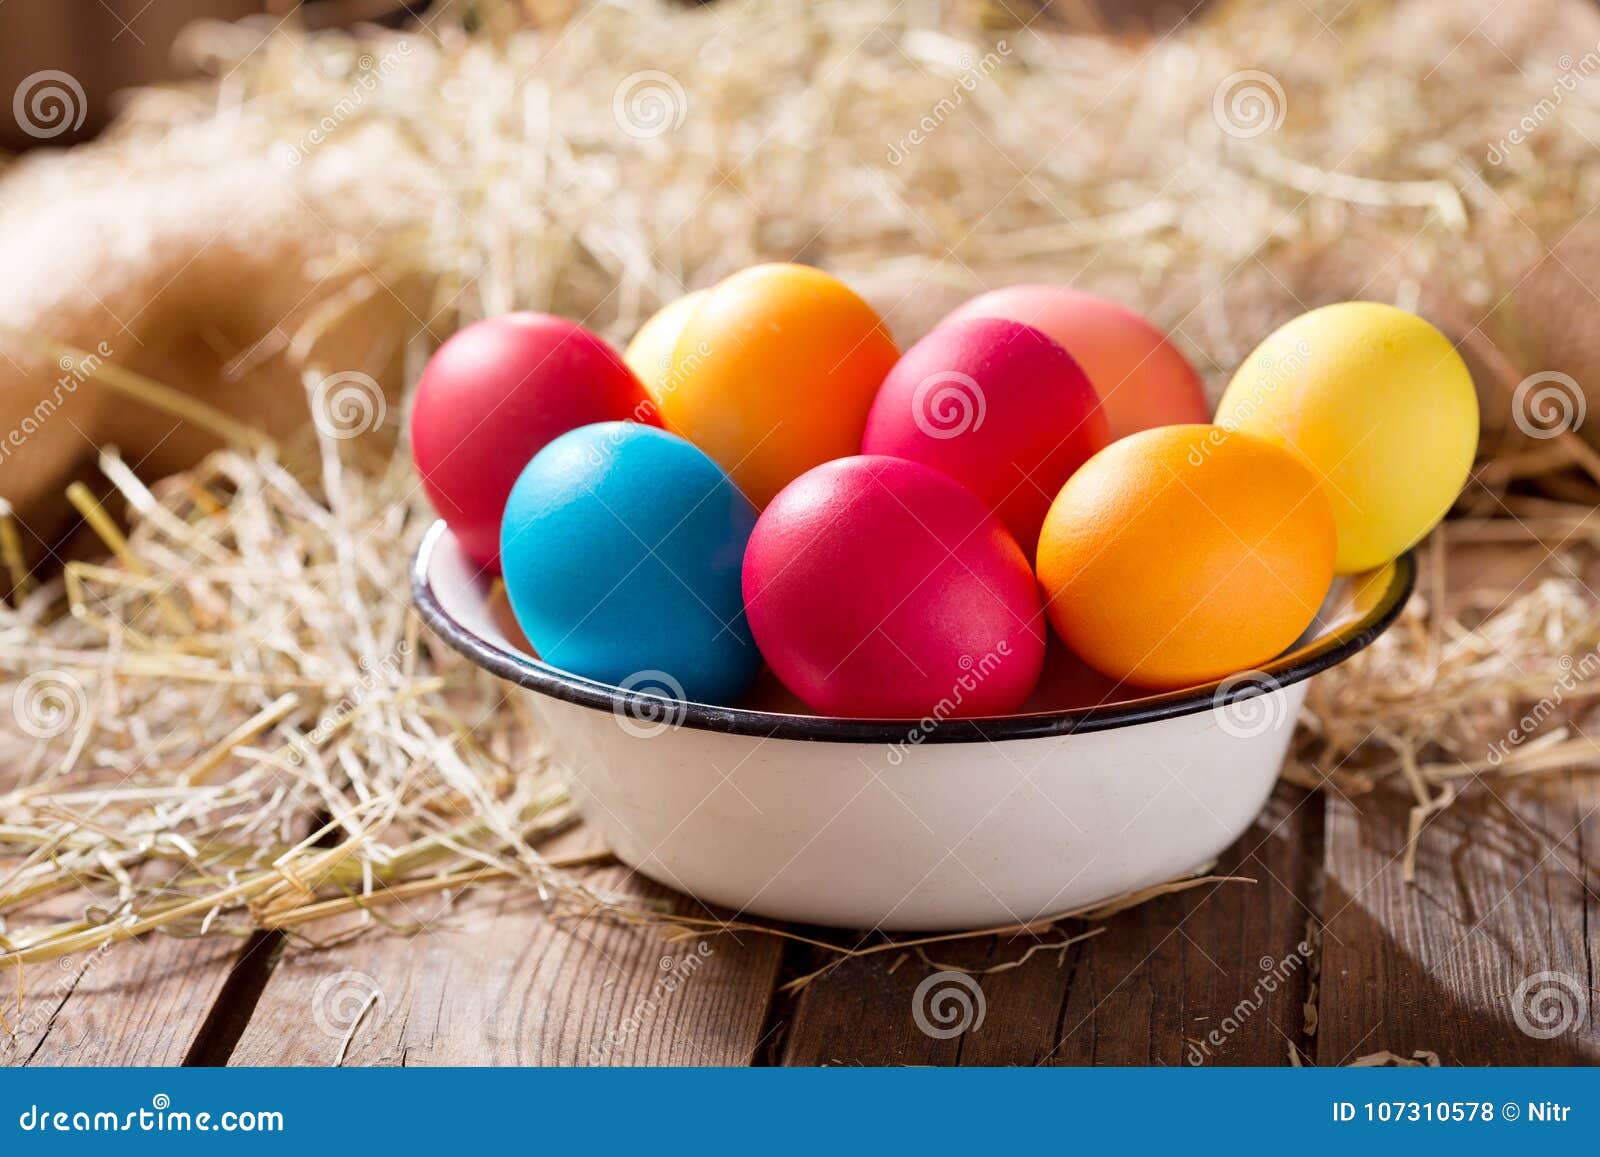 Bowl of Colorful Easter Eggs Stock Photo - Image of celebration, table ...